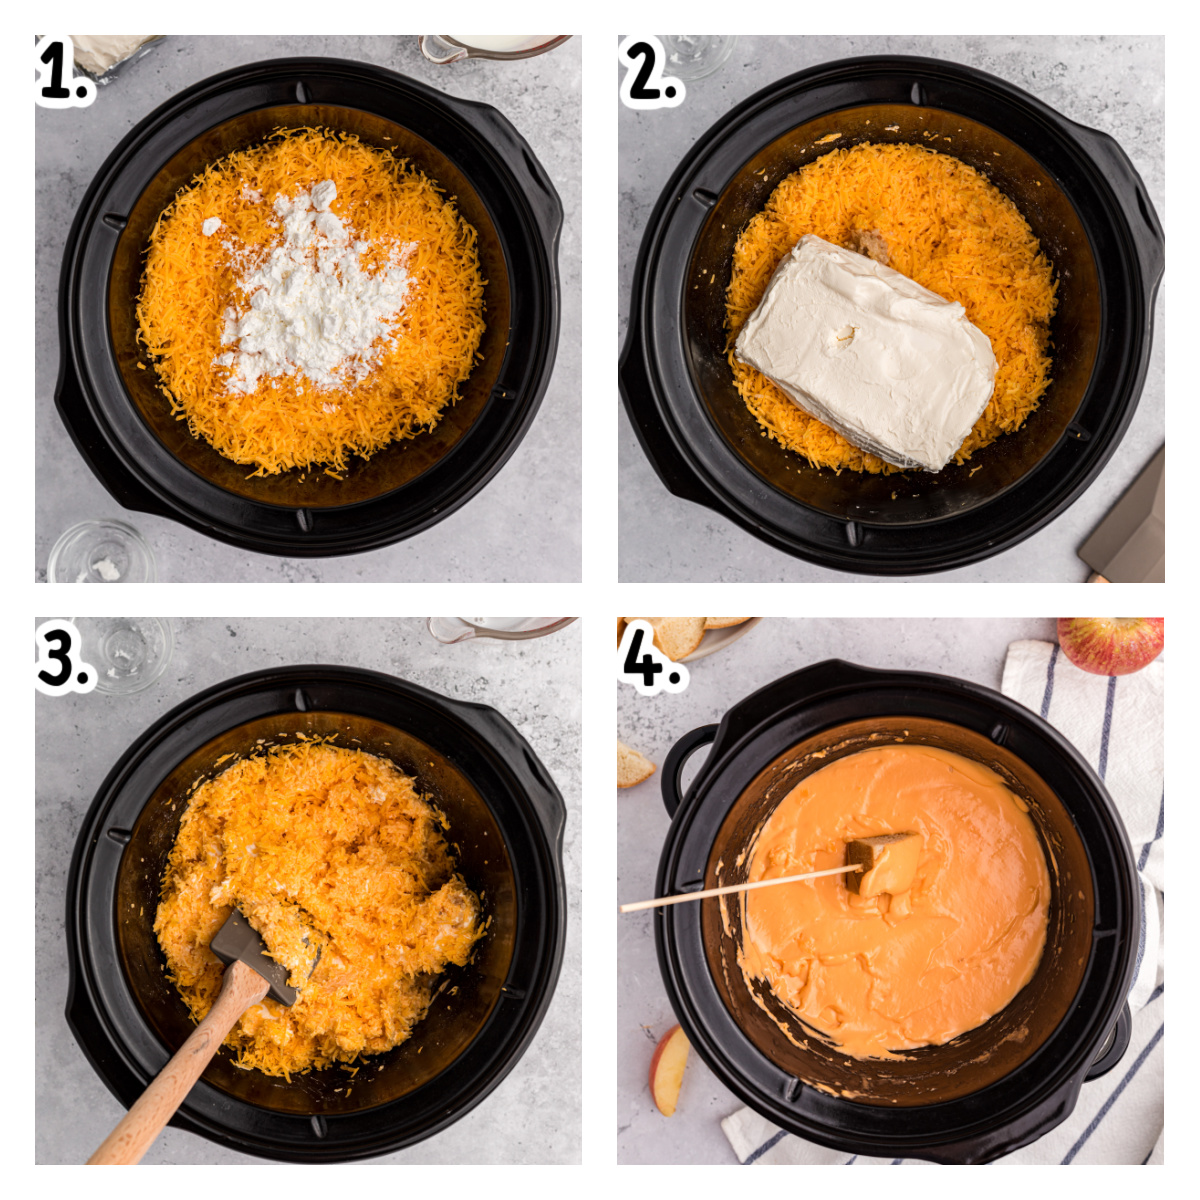 Four images showing how to make cheese fondue in a crockpot.